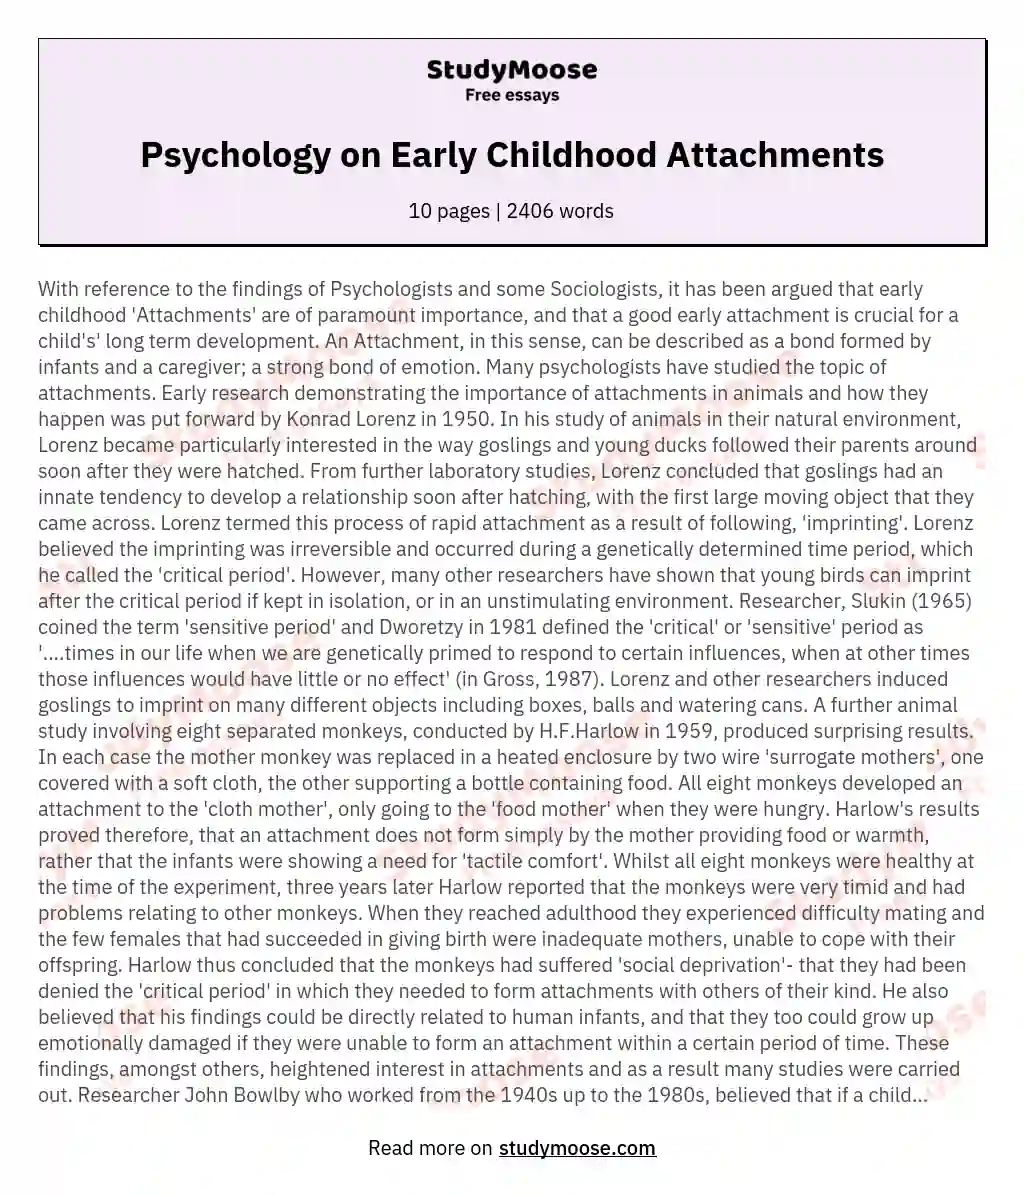 Psychology on Early Childhood Attachments essay